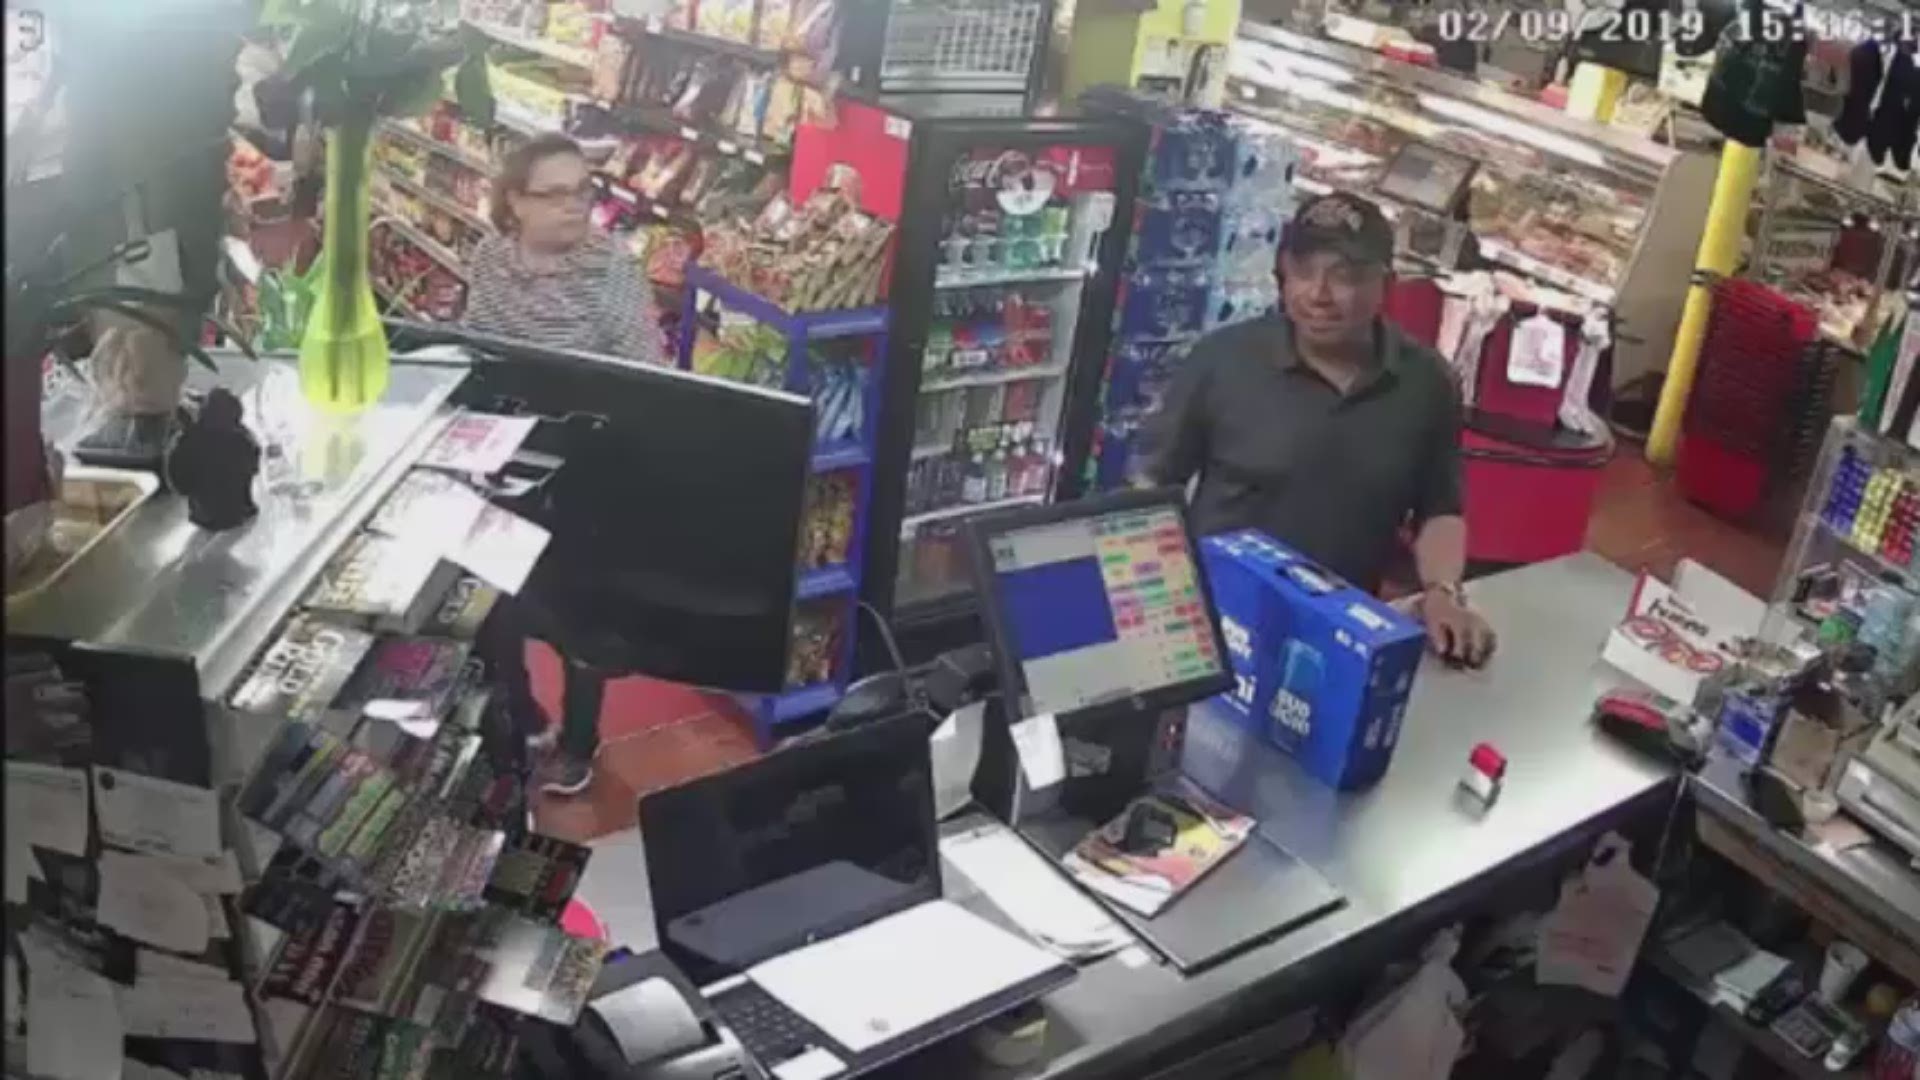 The Polk County Sheriff's Office said they got video surveillance that showed Bionel Cervin-Gomez buying beer at a convenience store two hours before the crash.